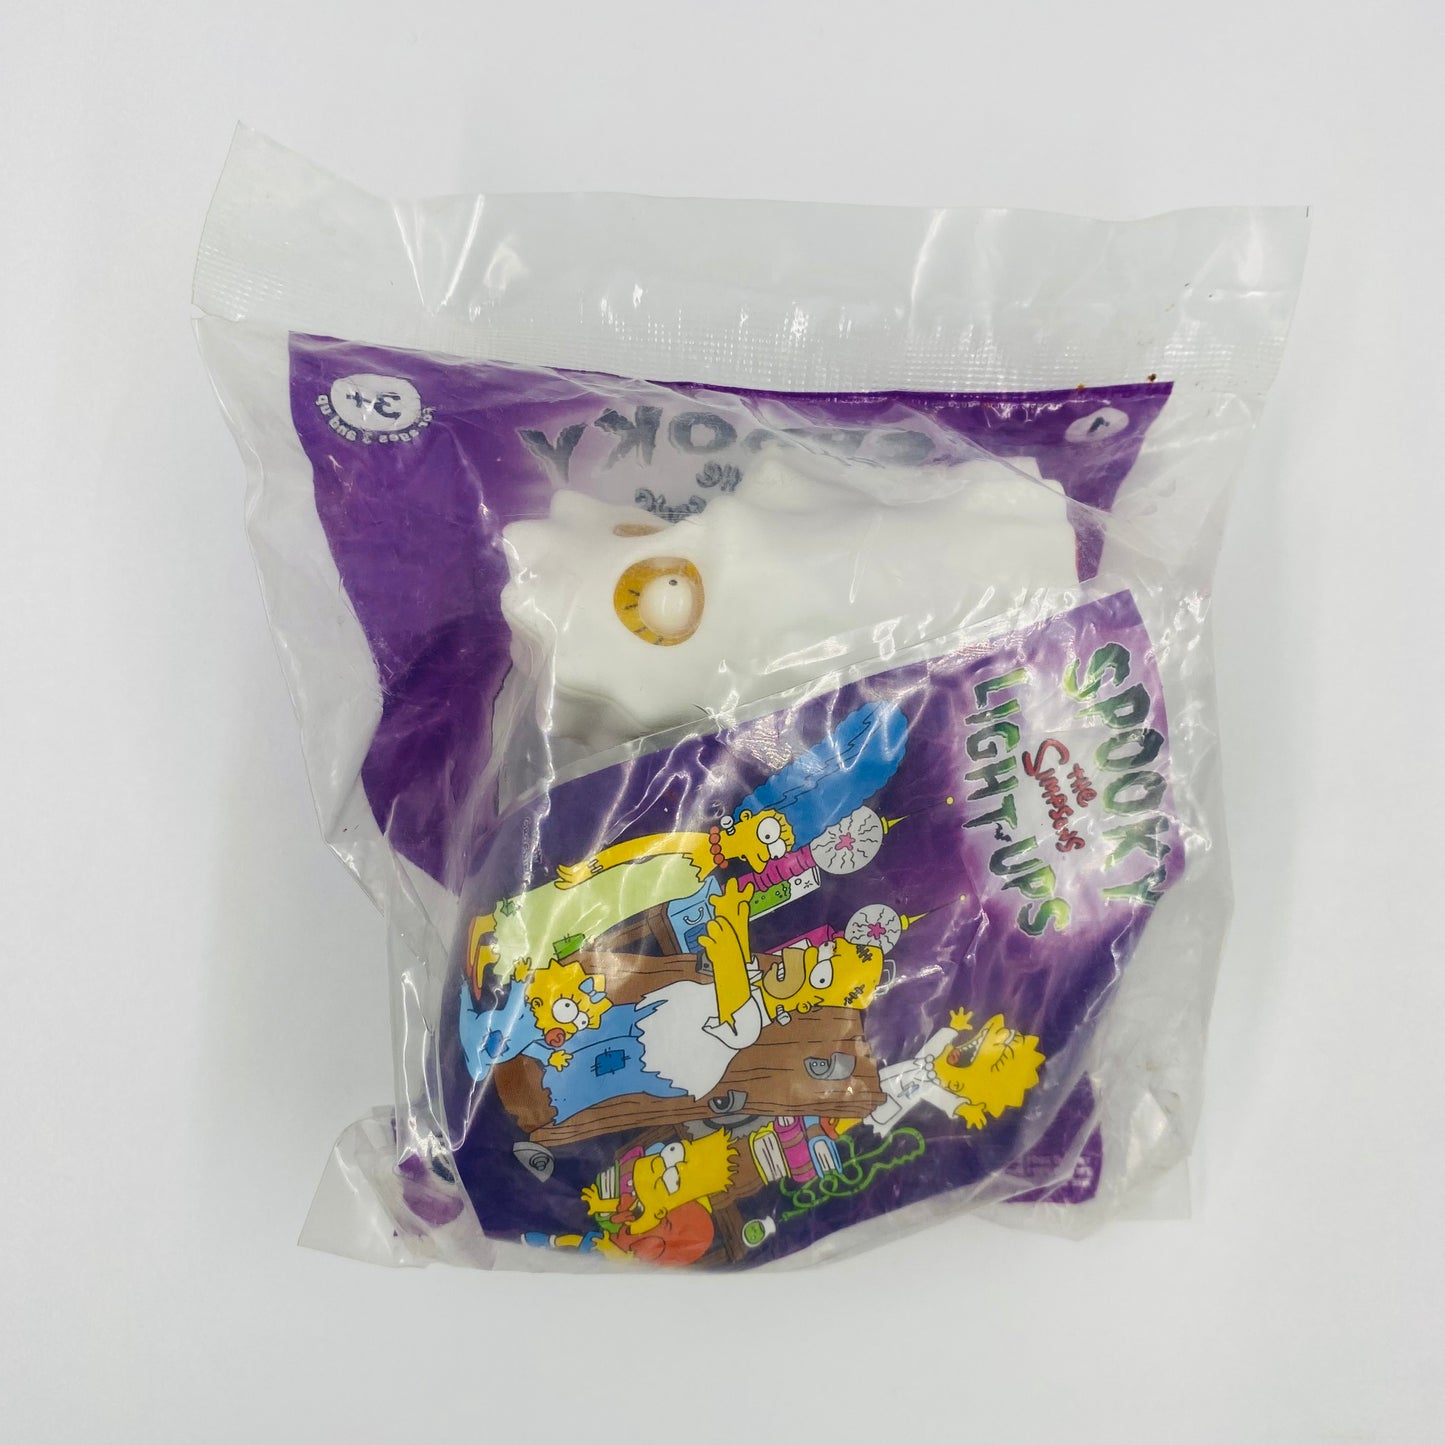 The Simpsons Spooky Light-Ups Lisa Simpson Burger King Kids' Meals toy (2001) bagged